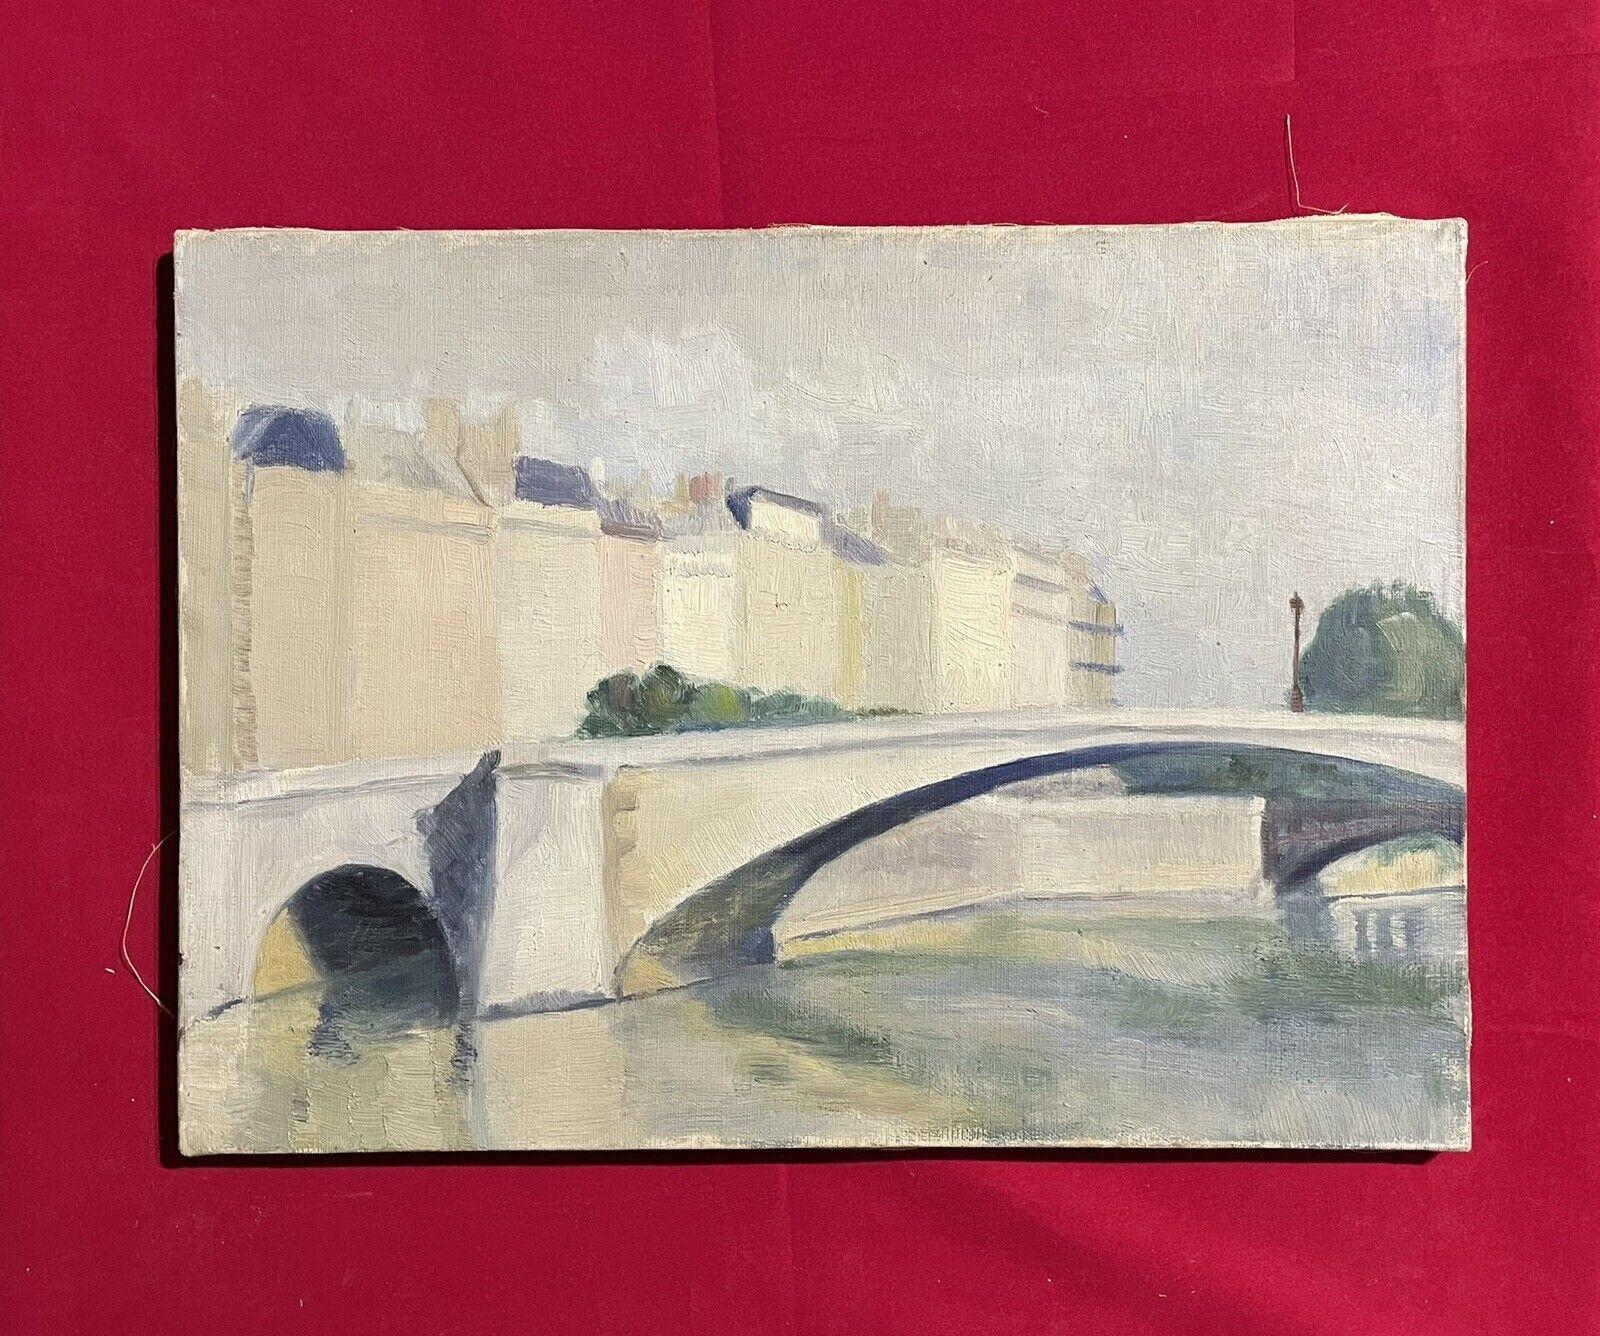 Artist/ School: Genevieve Zondervan (1922-2013), stamped verso

Title: Landscape sketch

Medium: oil painting on canvas, unframed

Size: painting: 13 x 18 inches

Provenance: the artists estate, France

Condition: very good.